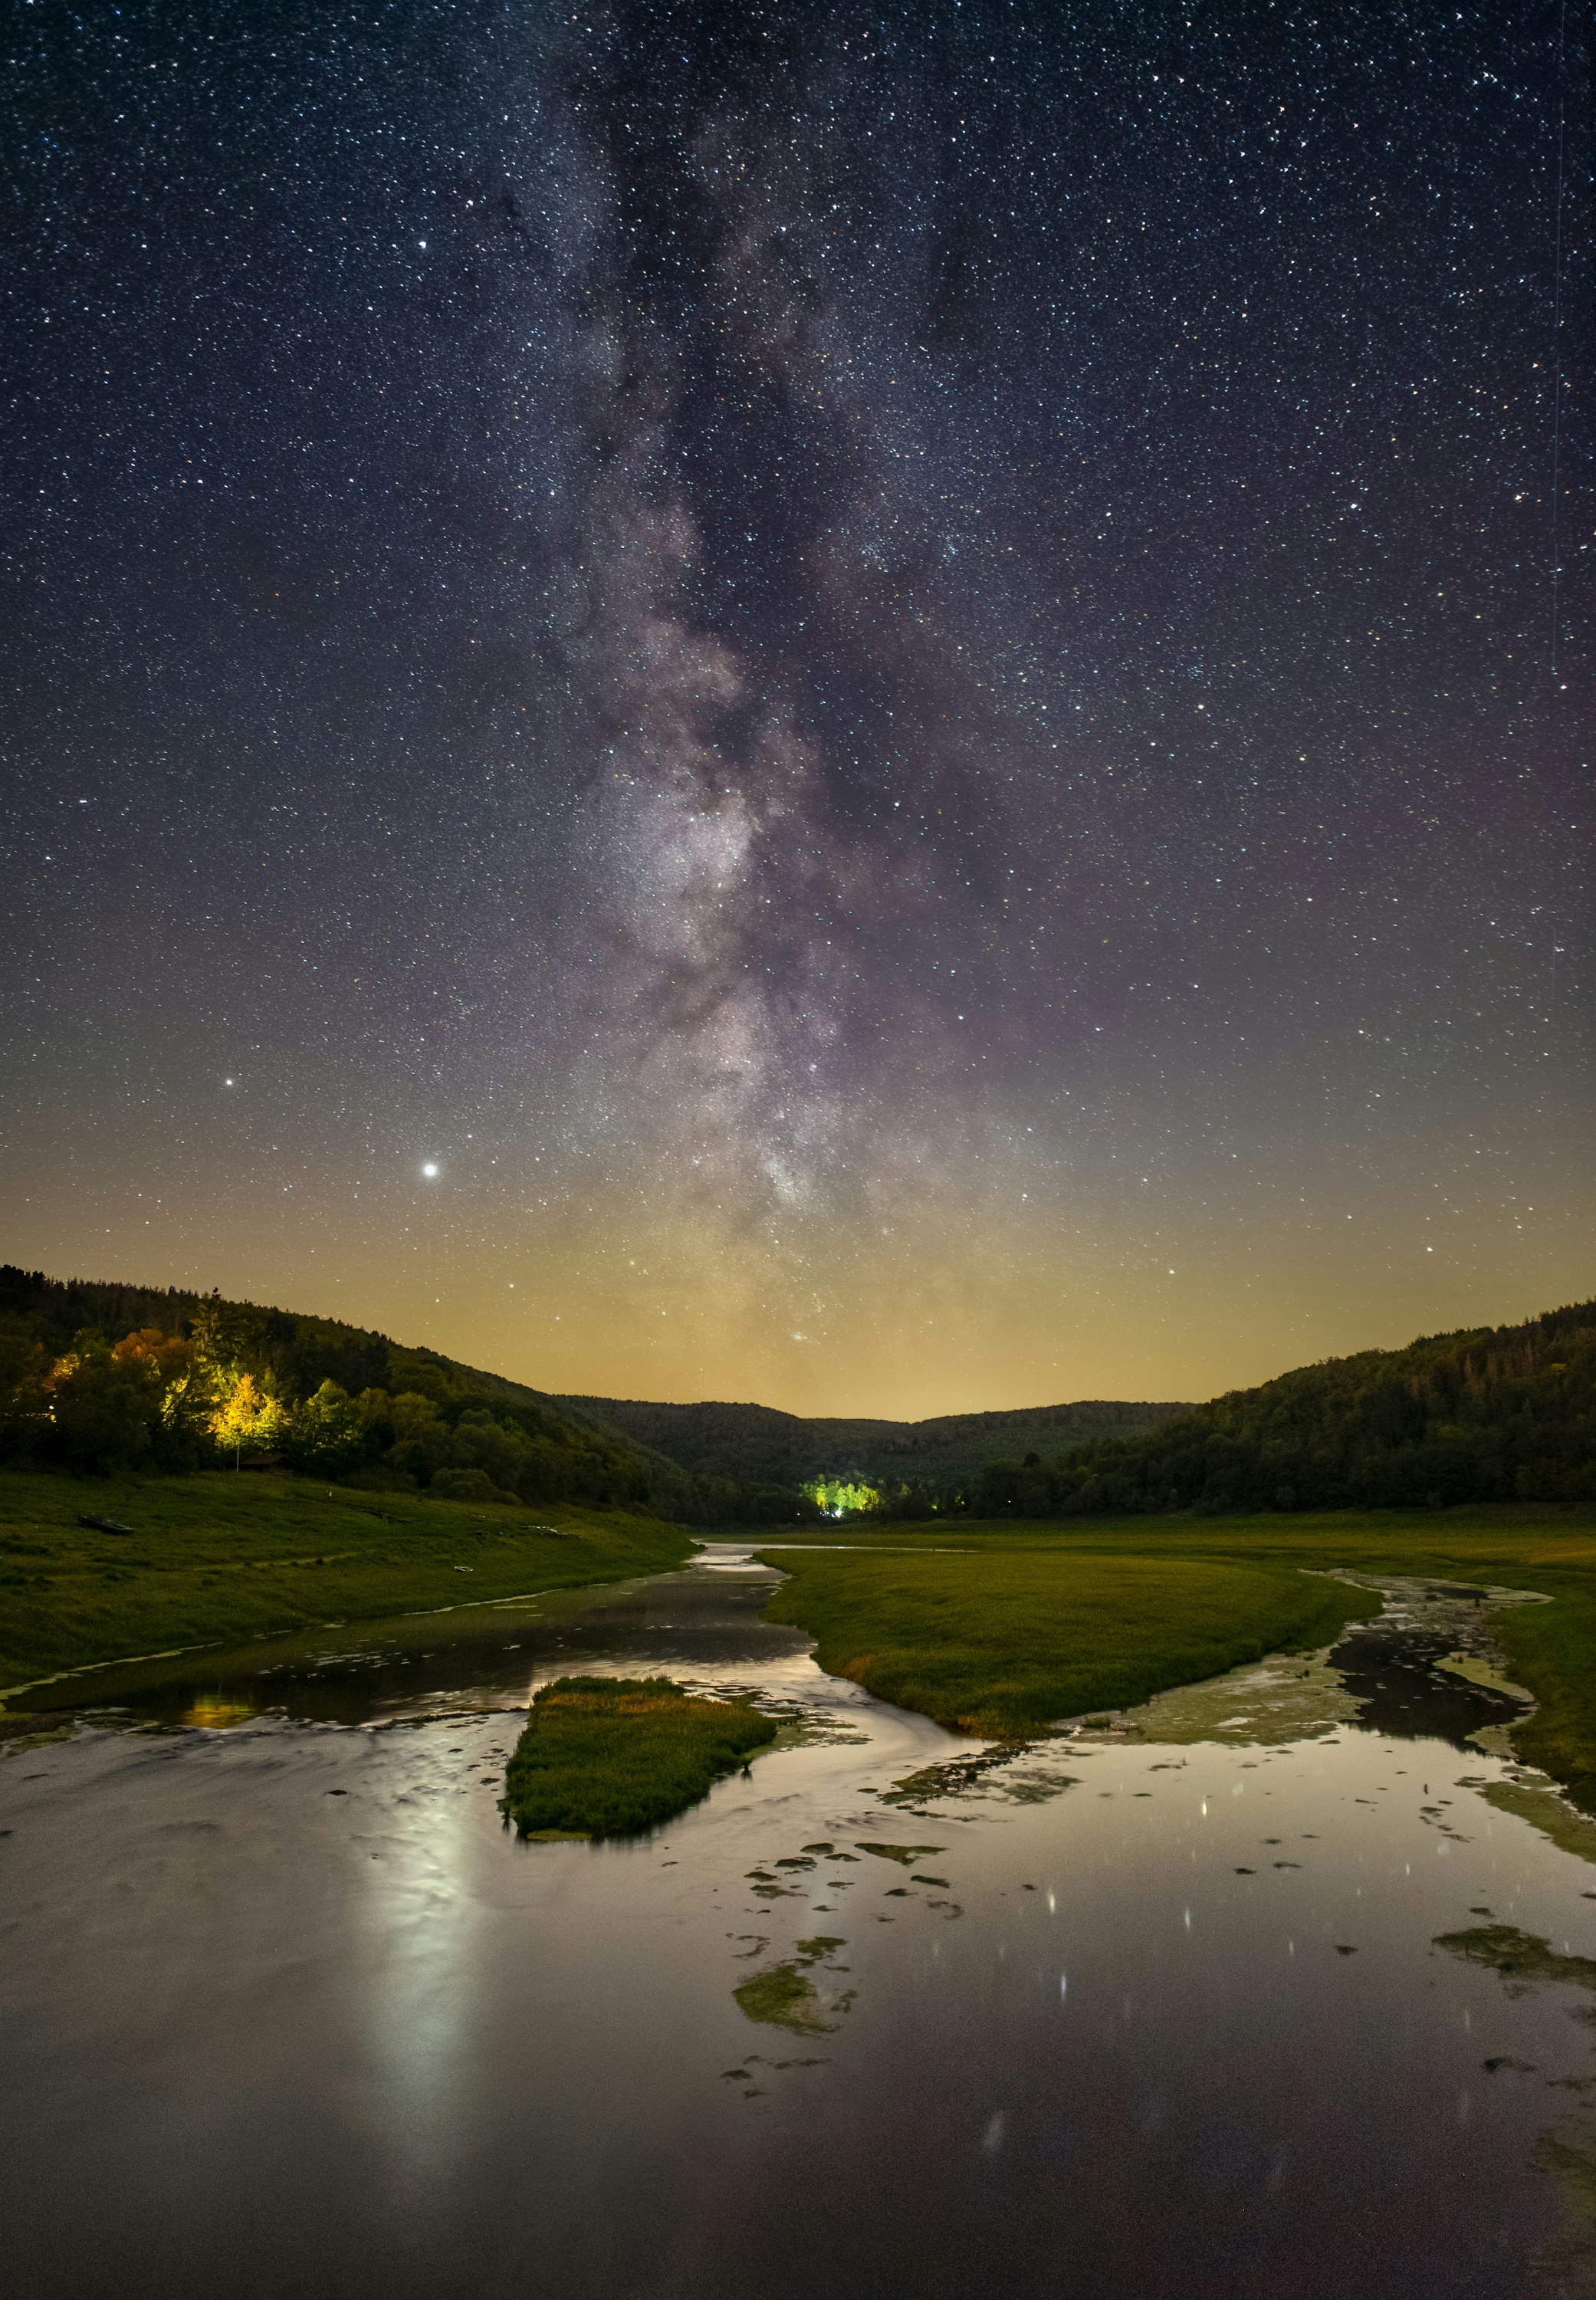 lake in the middle of green grass field under starry night